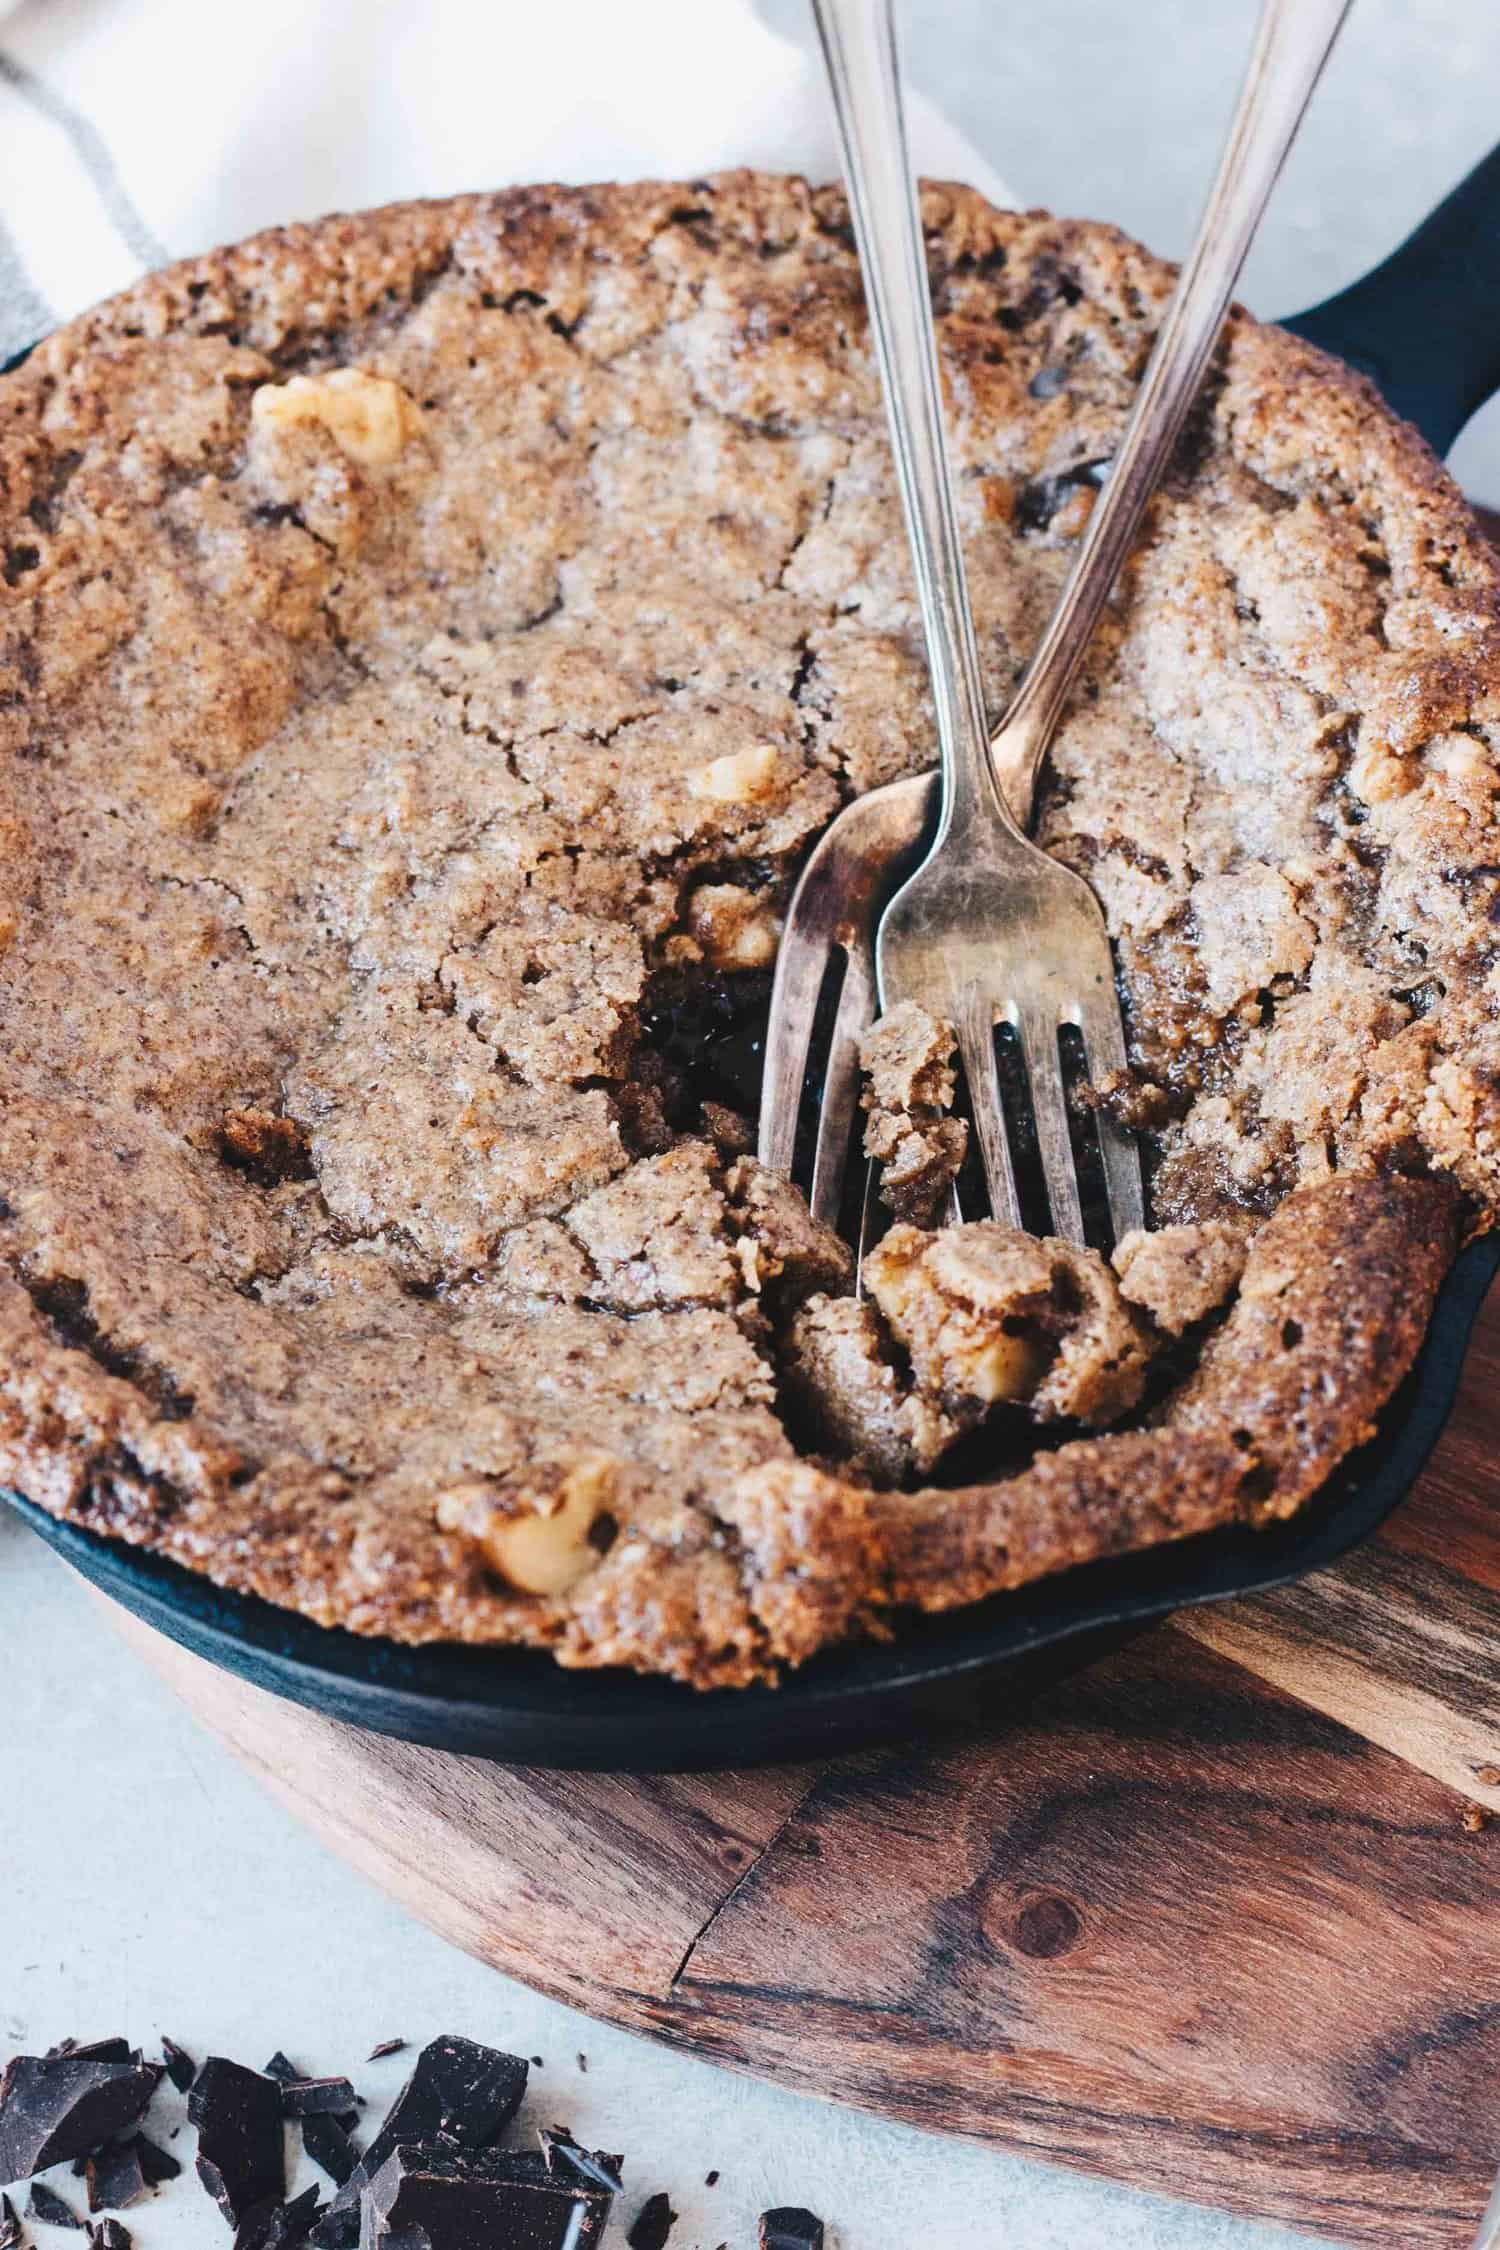 two forks rest in a divot in the White Chocolate Keto Skillet Blondie created from the first bites